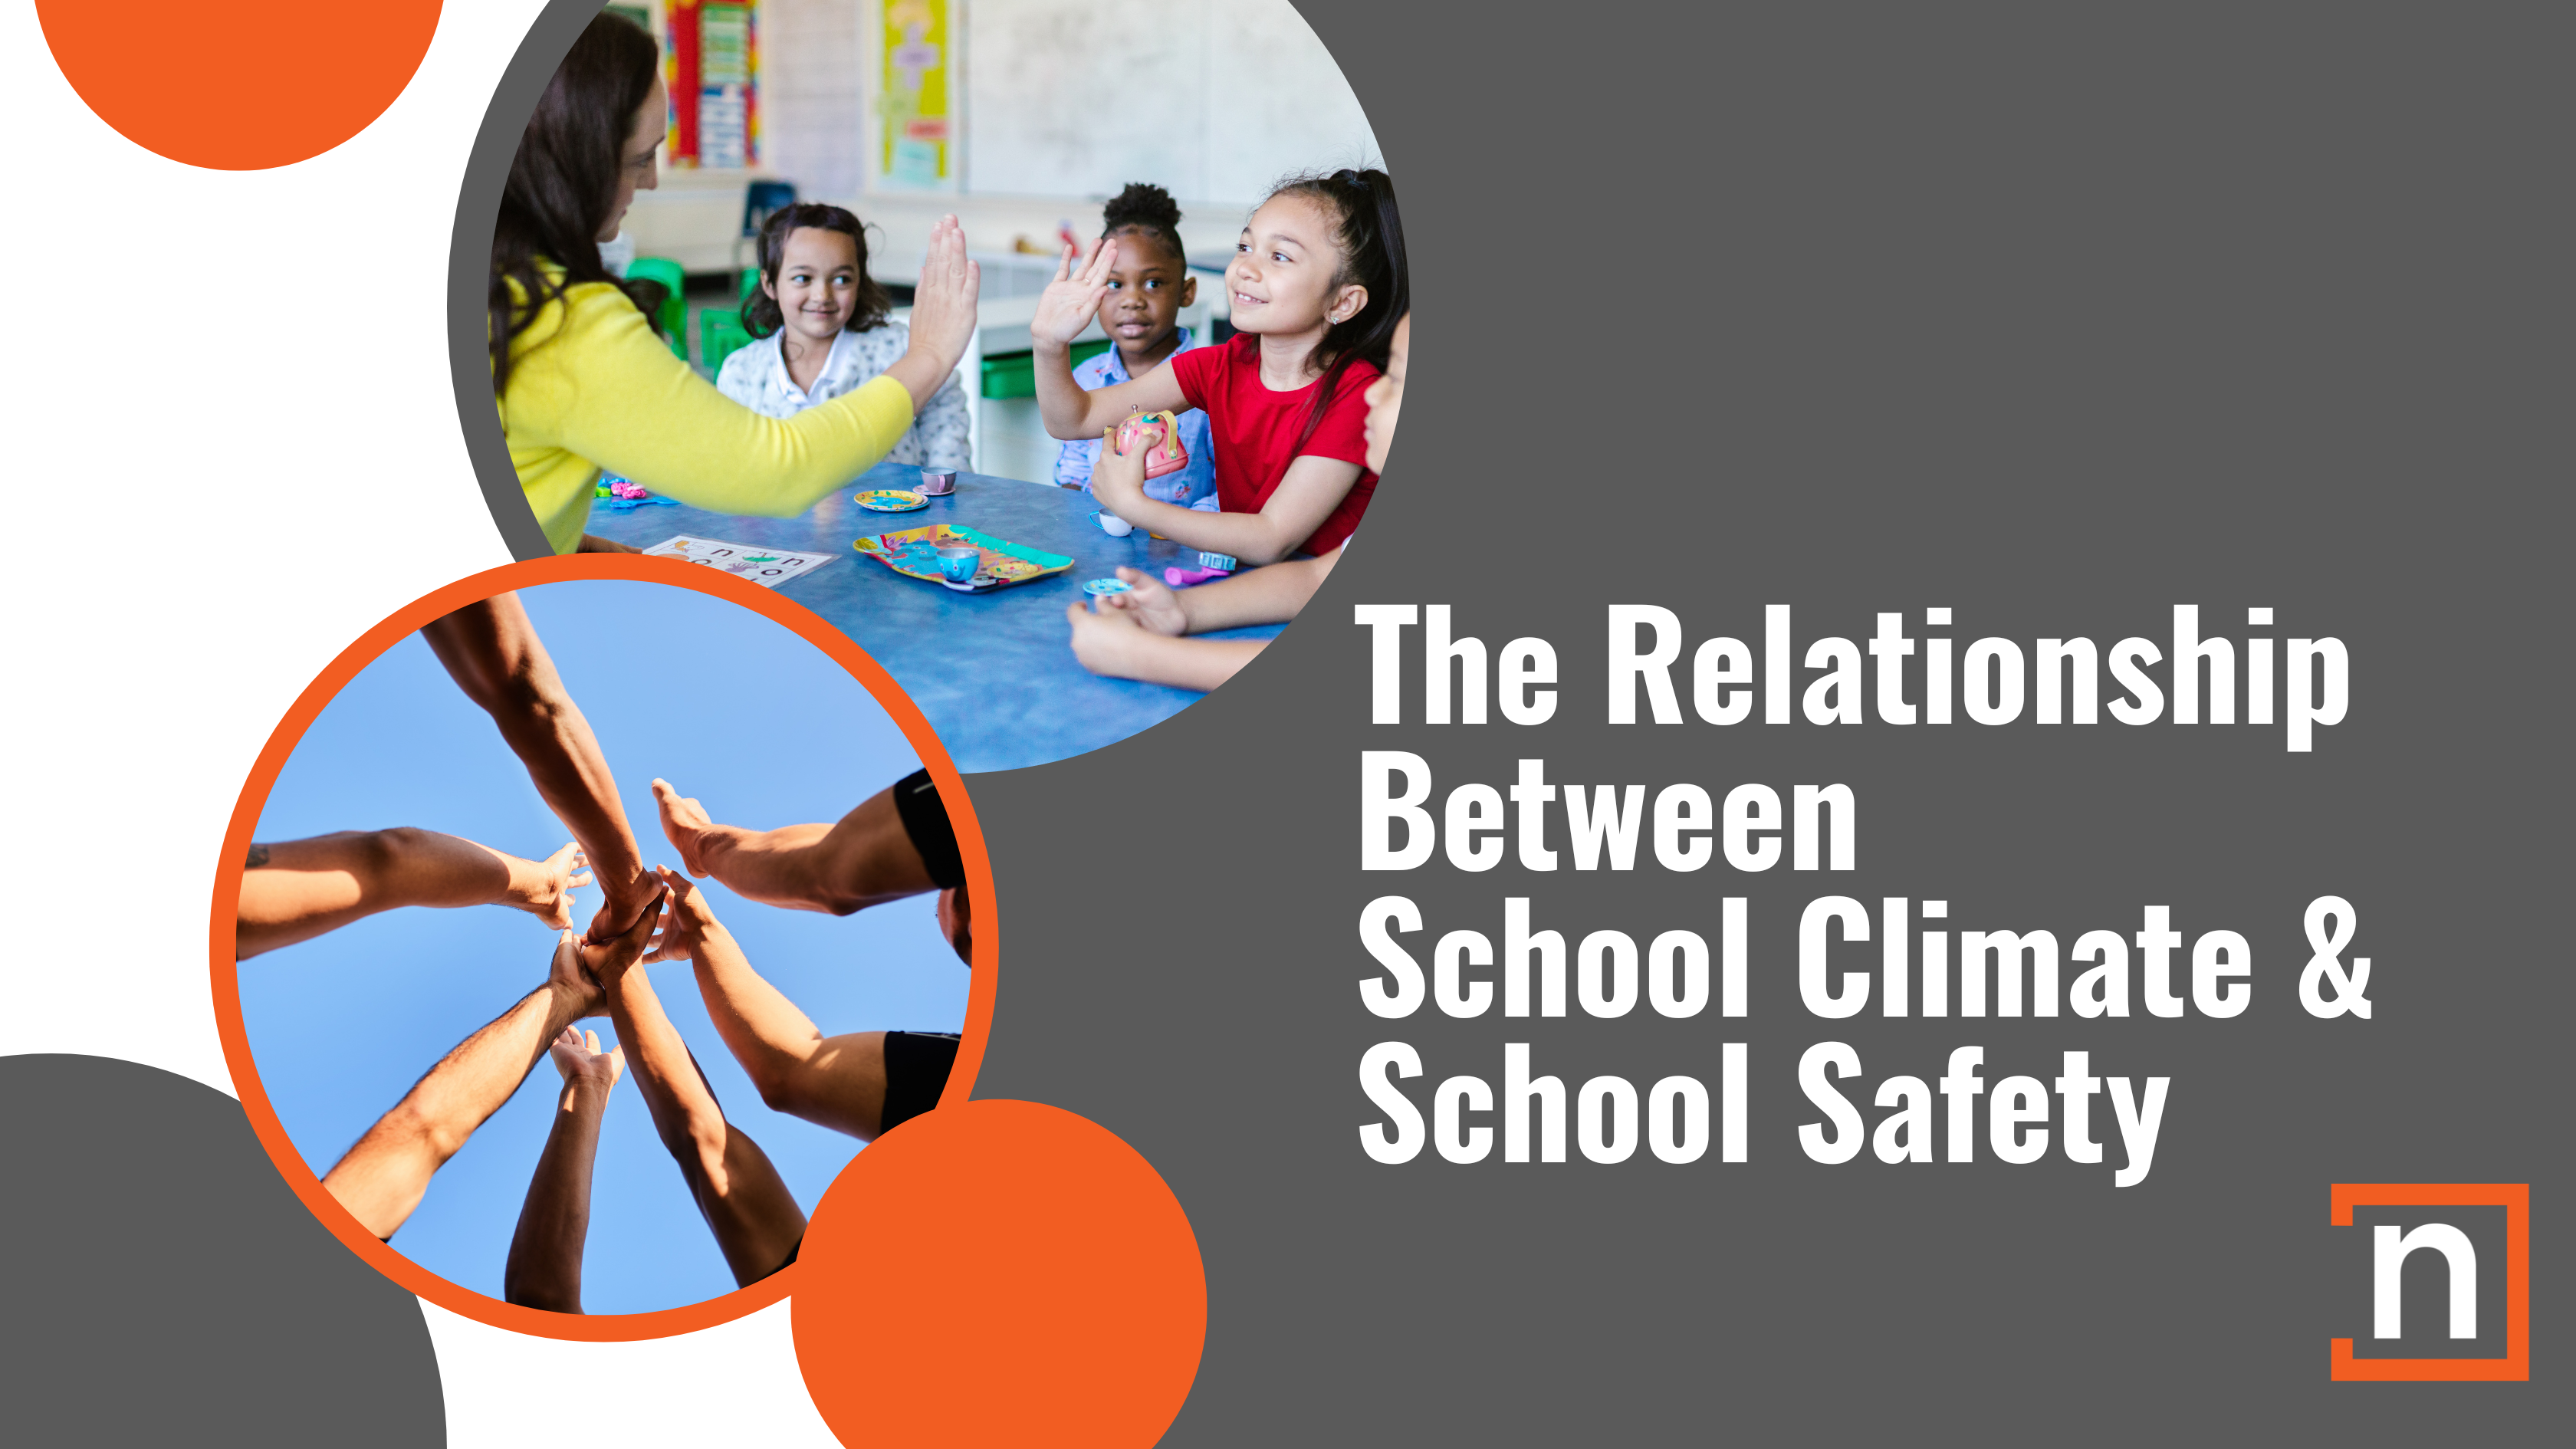 The relationship between school climate and school safety